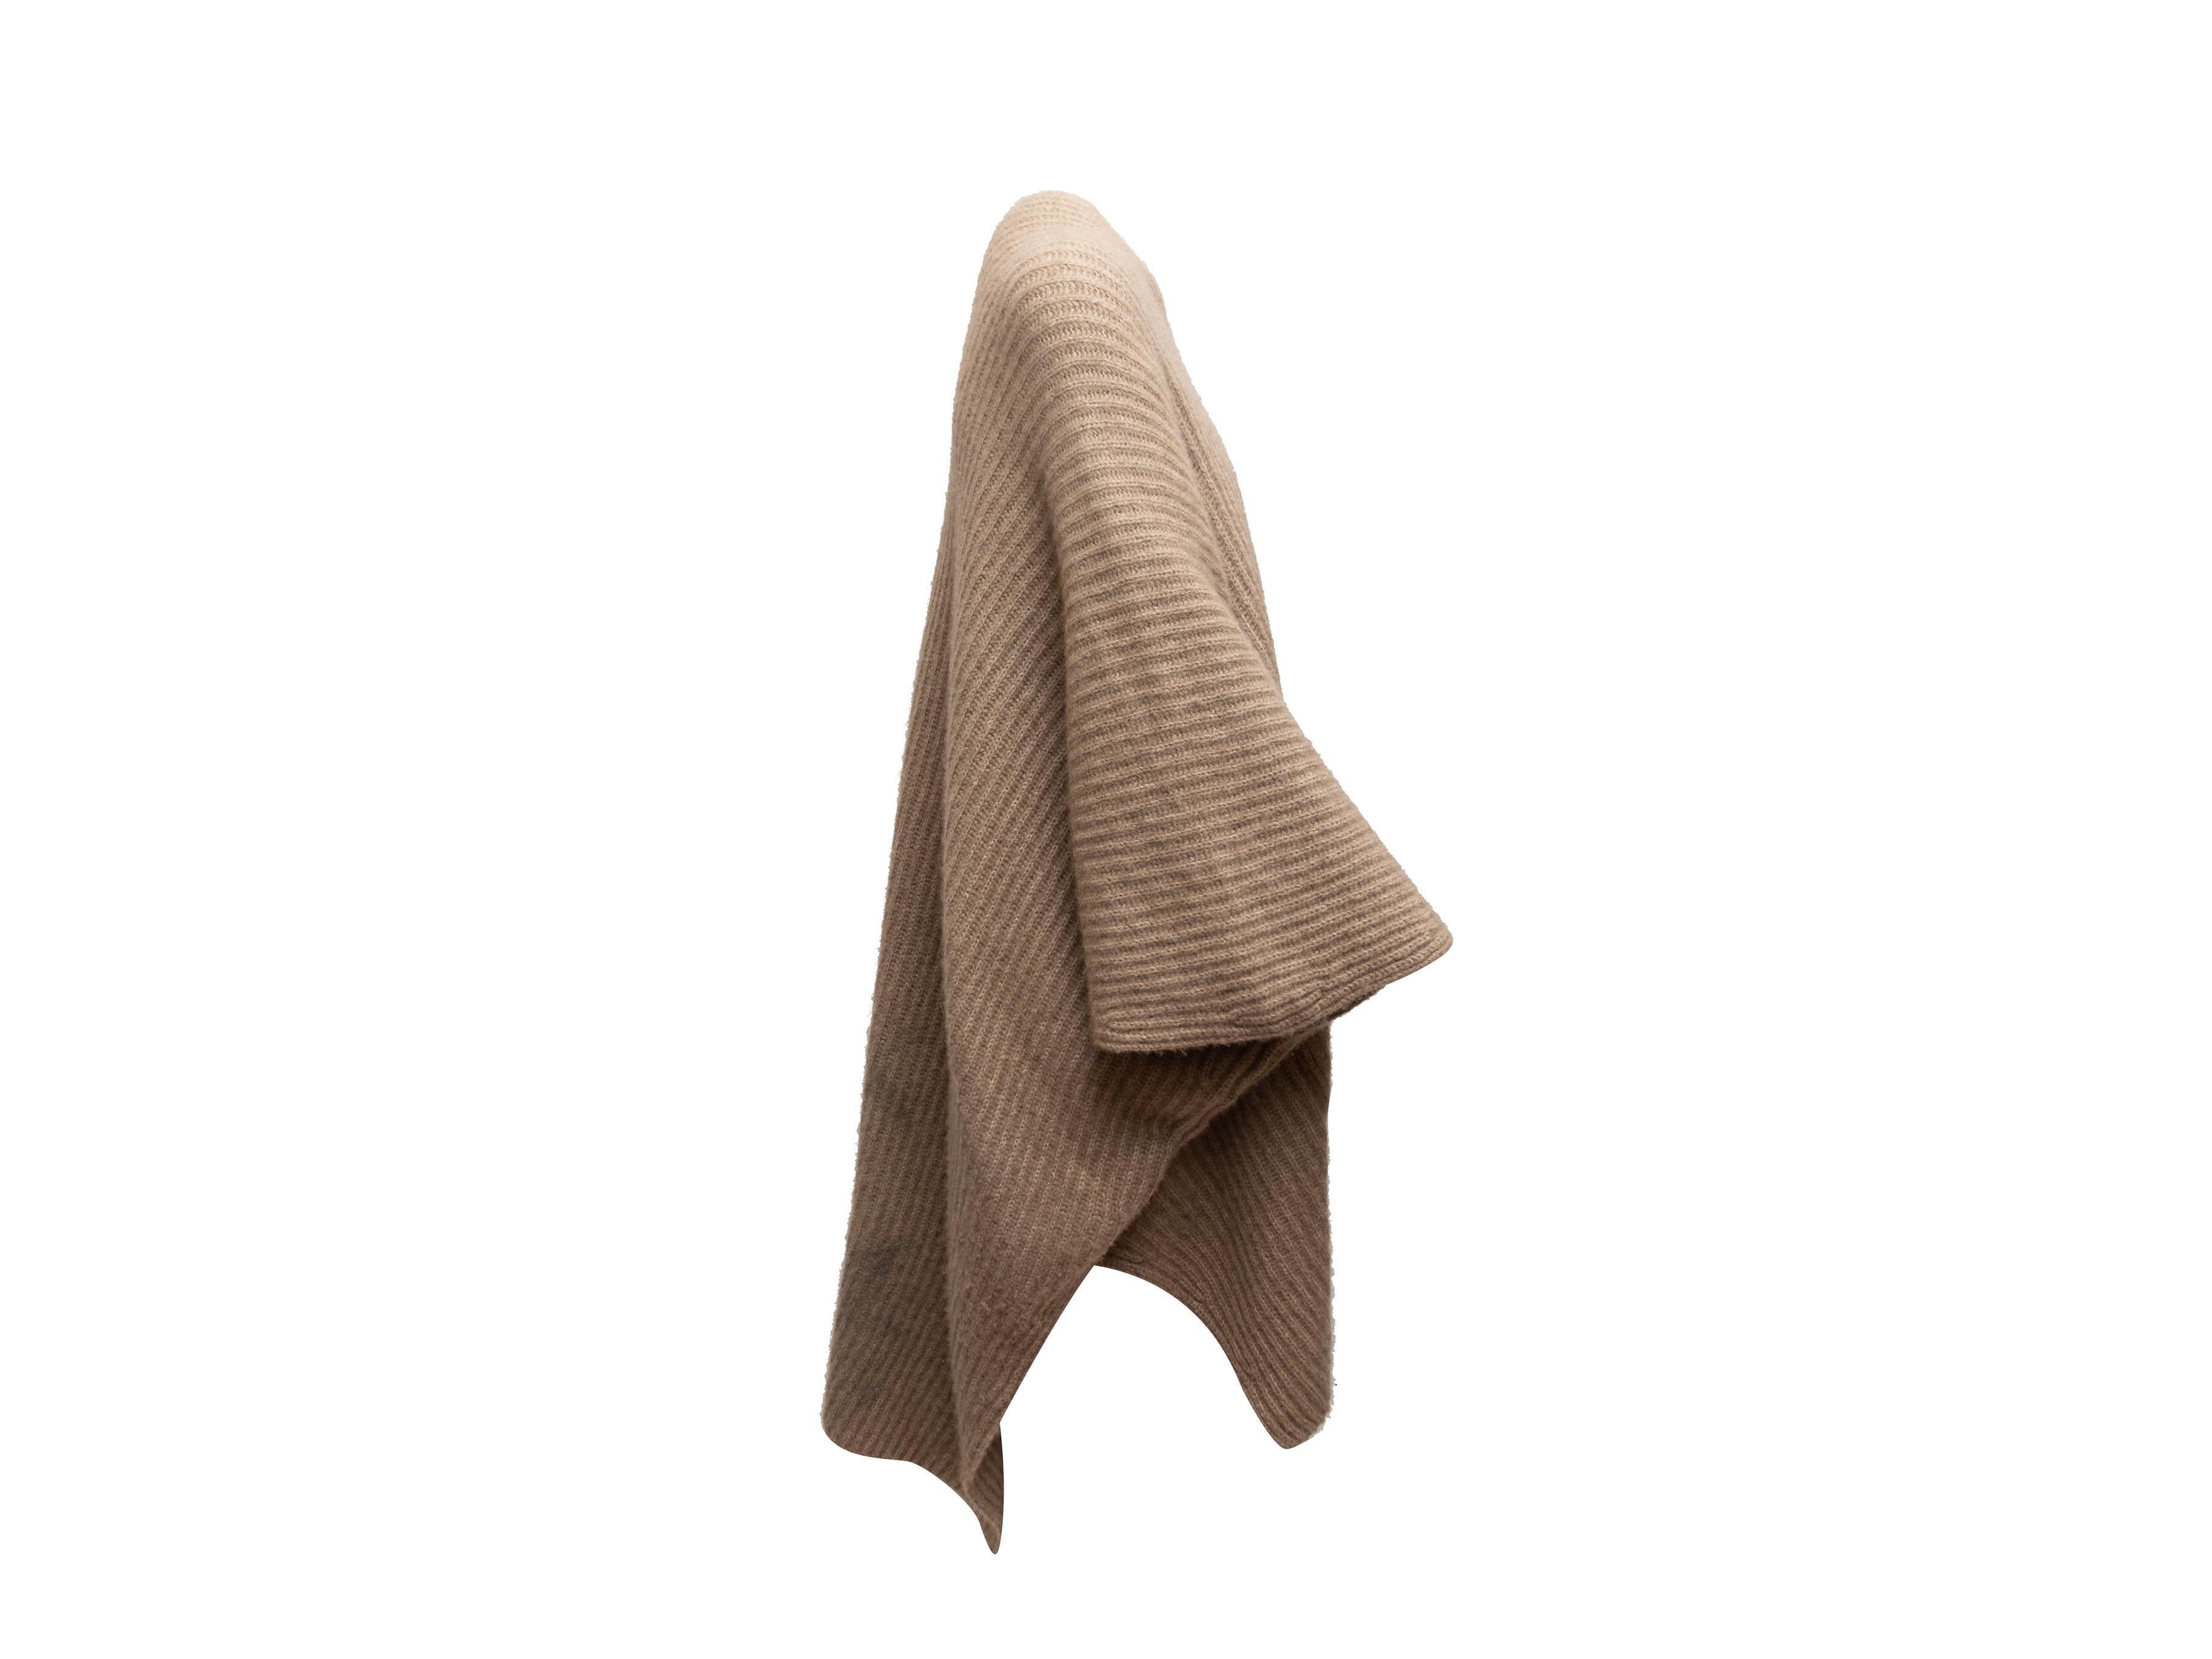 Product details: Tan oversized ribbed cashmere poncho by Derek Lam. V-neck. Dual patch pockets. Zip closure at center front. 49